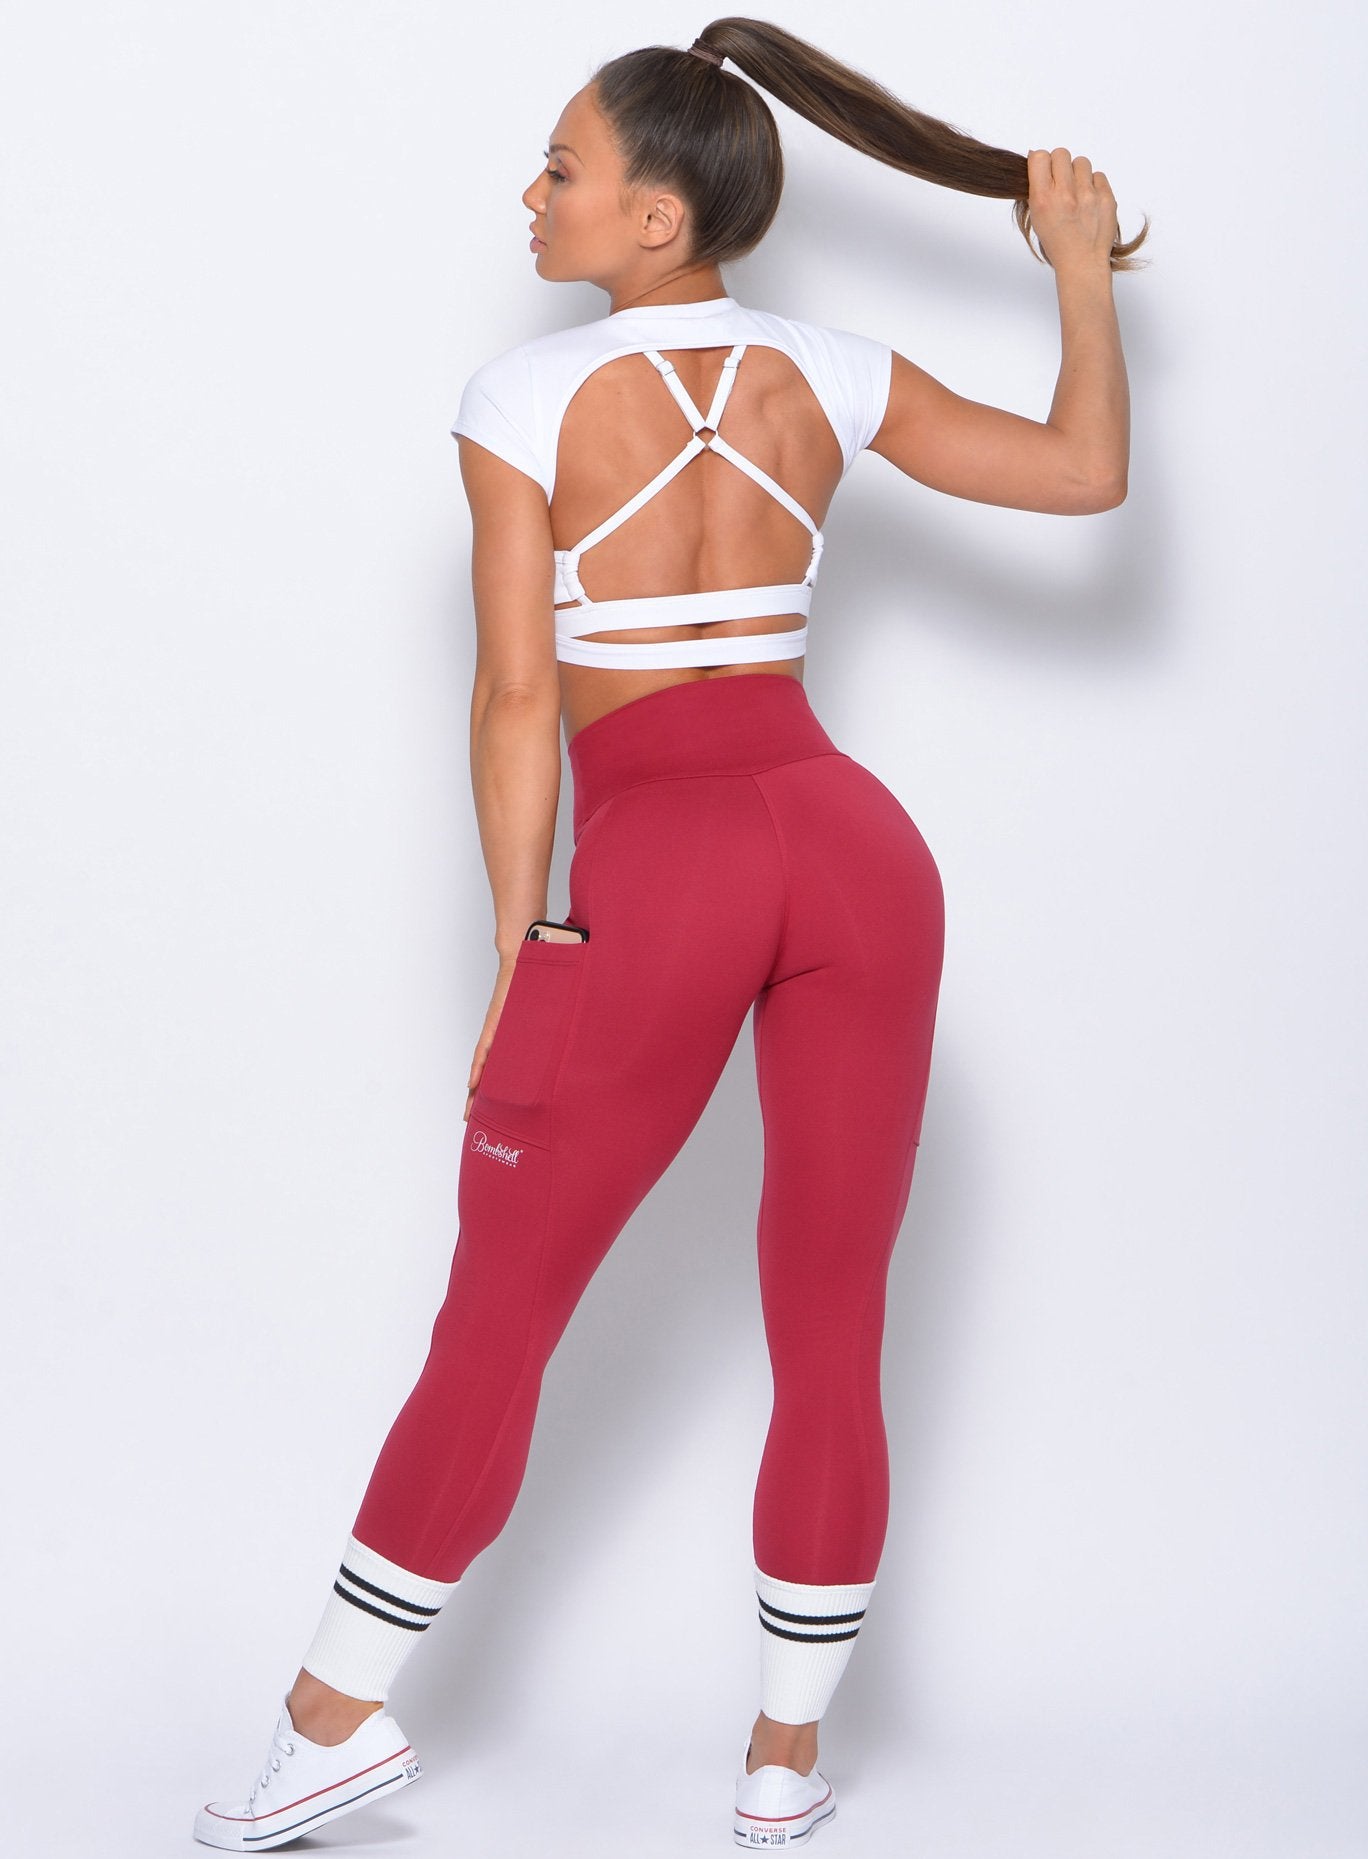 Full back view of the model in the Ankle Sock Leggings in maroon color with 2 black stripes